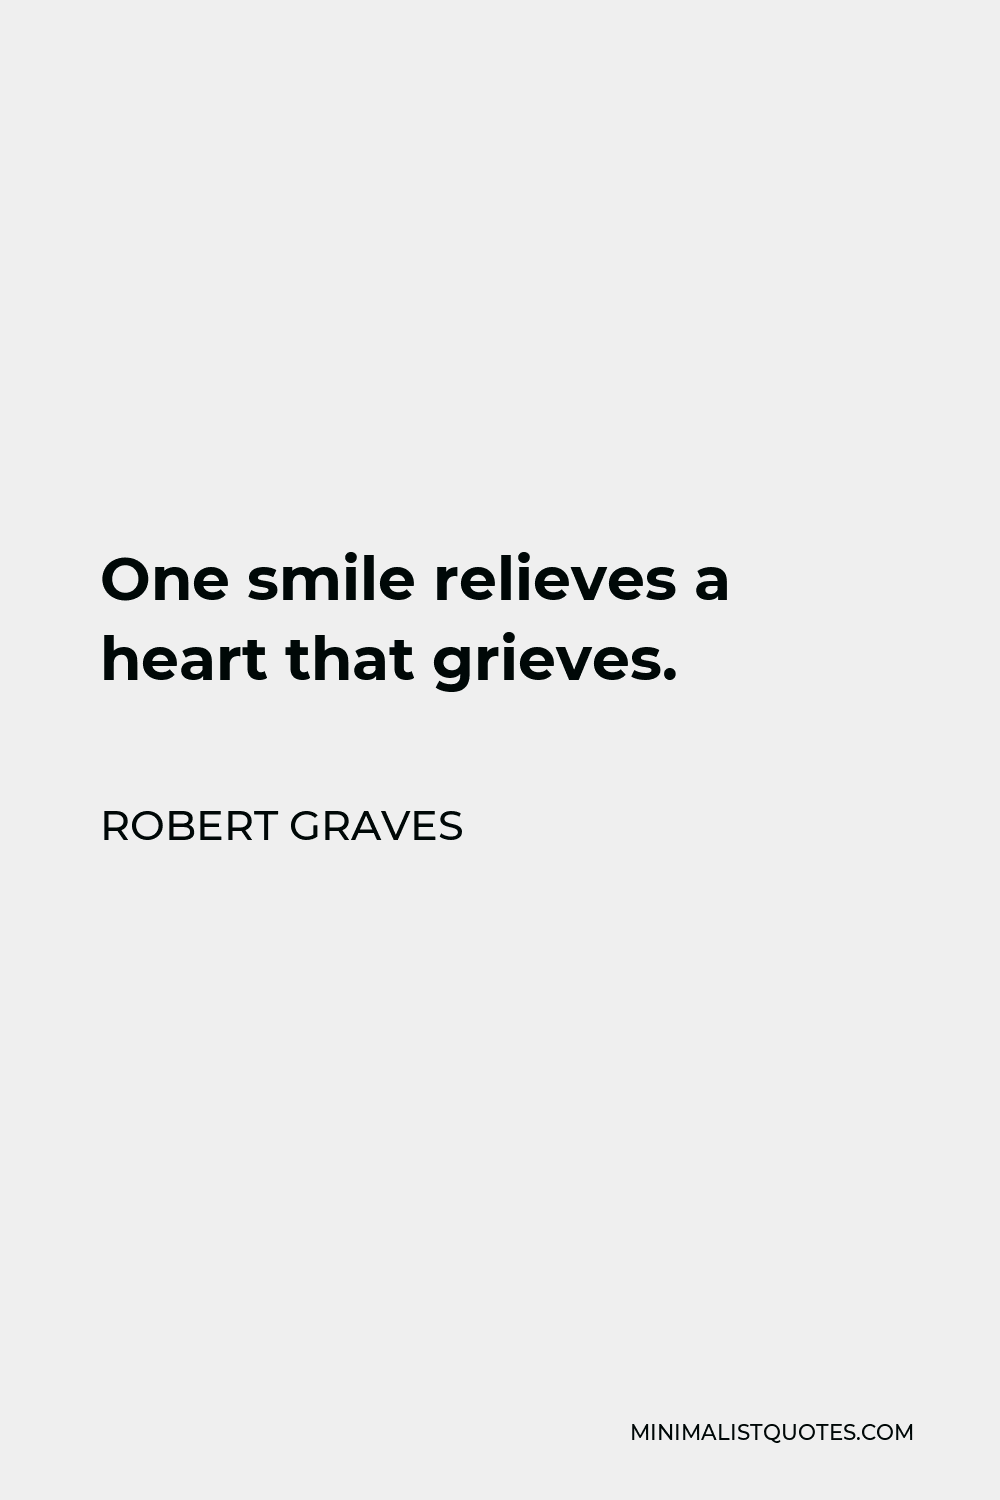 Robert Graves Quote - One smile relieves a heart that grieves.